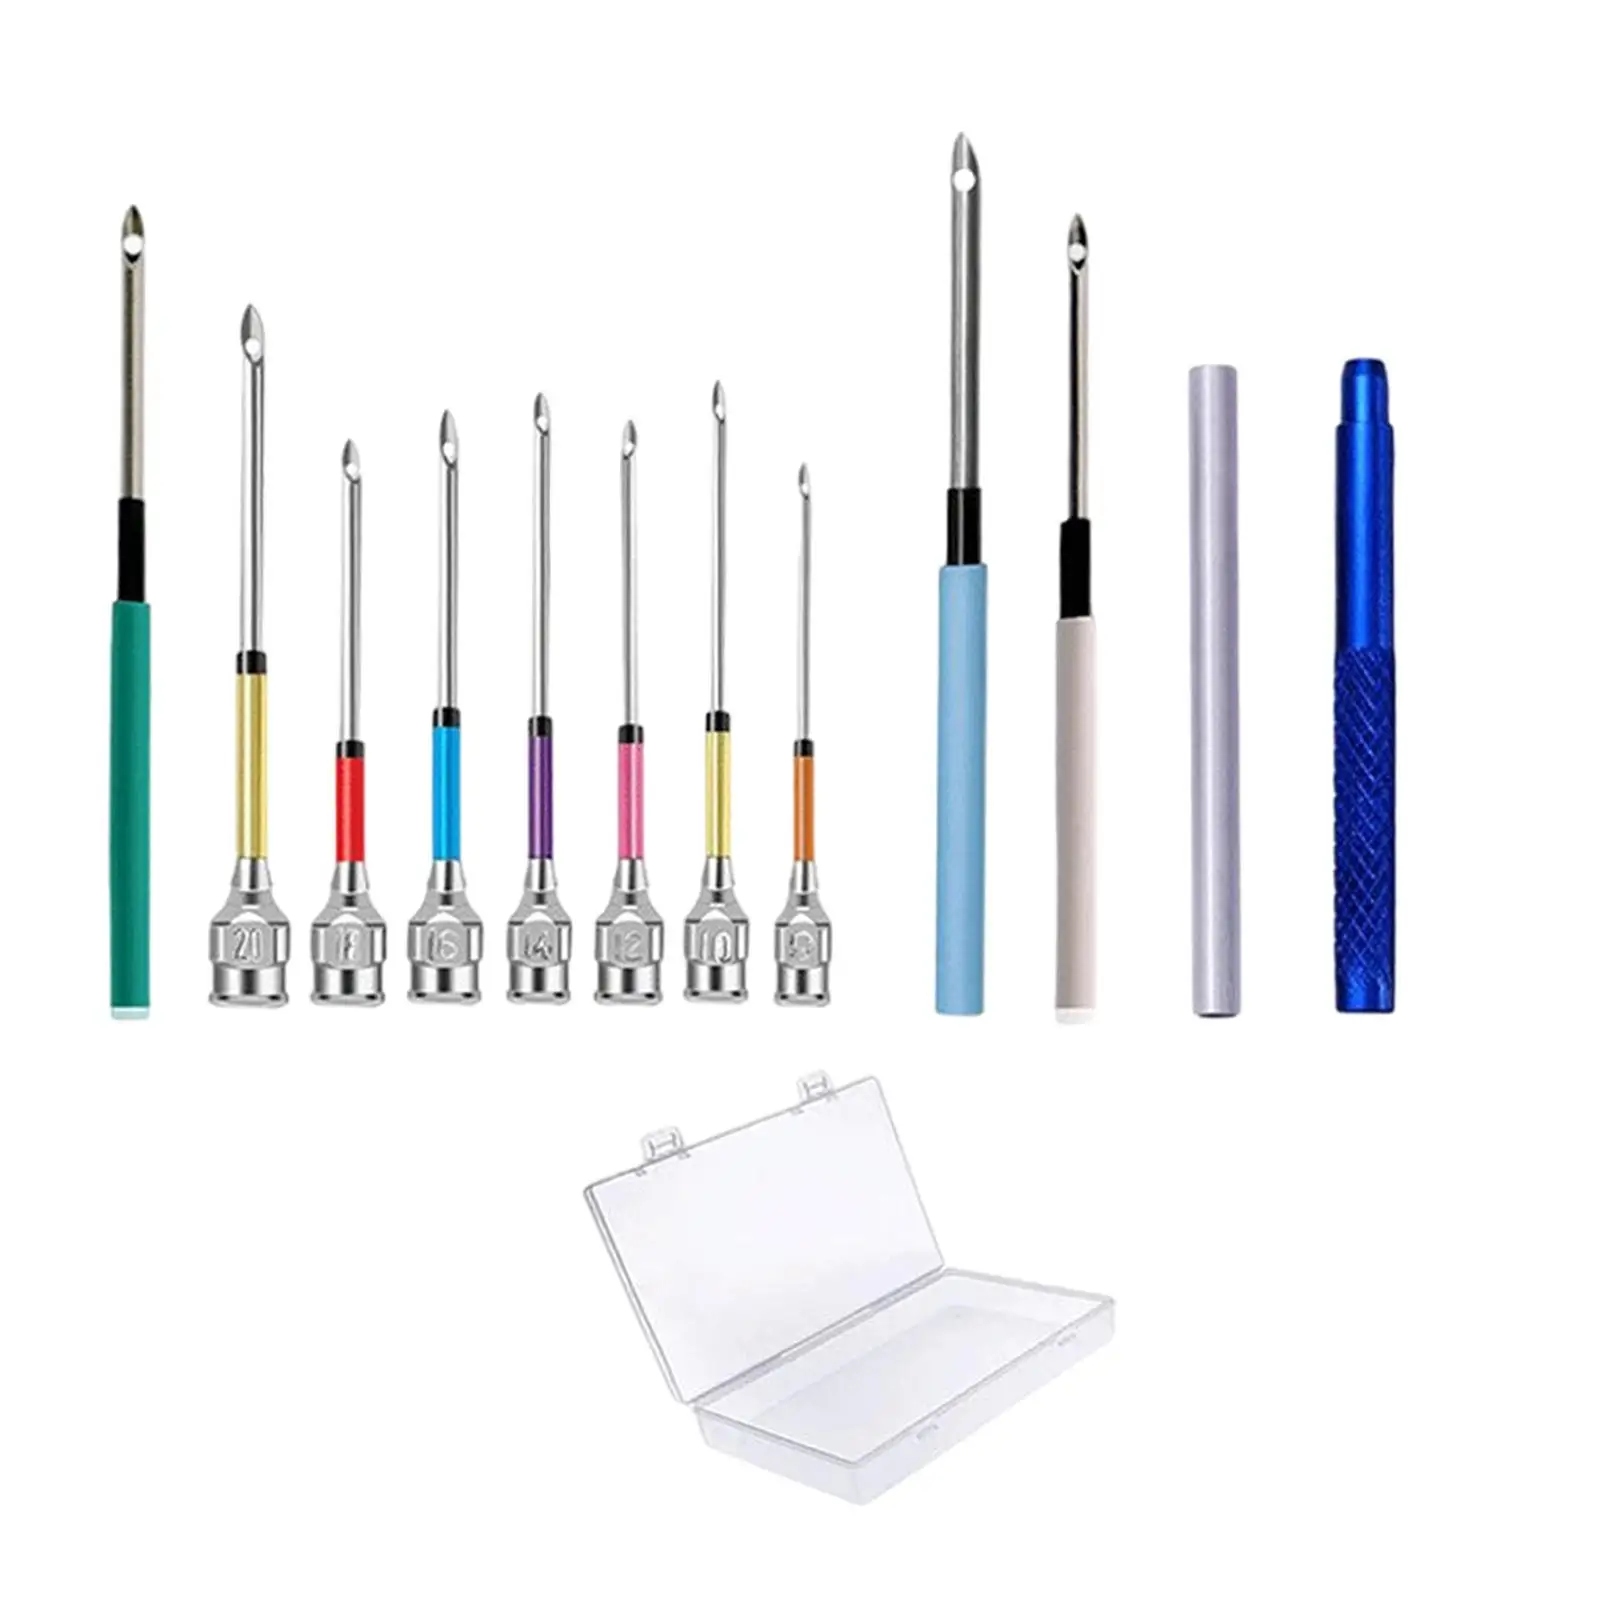 12x DIY Punch Needle Embroidery Kit Needle Threaders for Poke Embroidery Cross Stitching Adults Making Rug Tufted Carpets